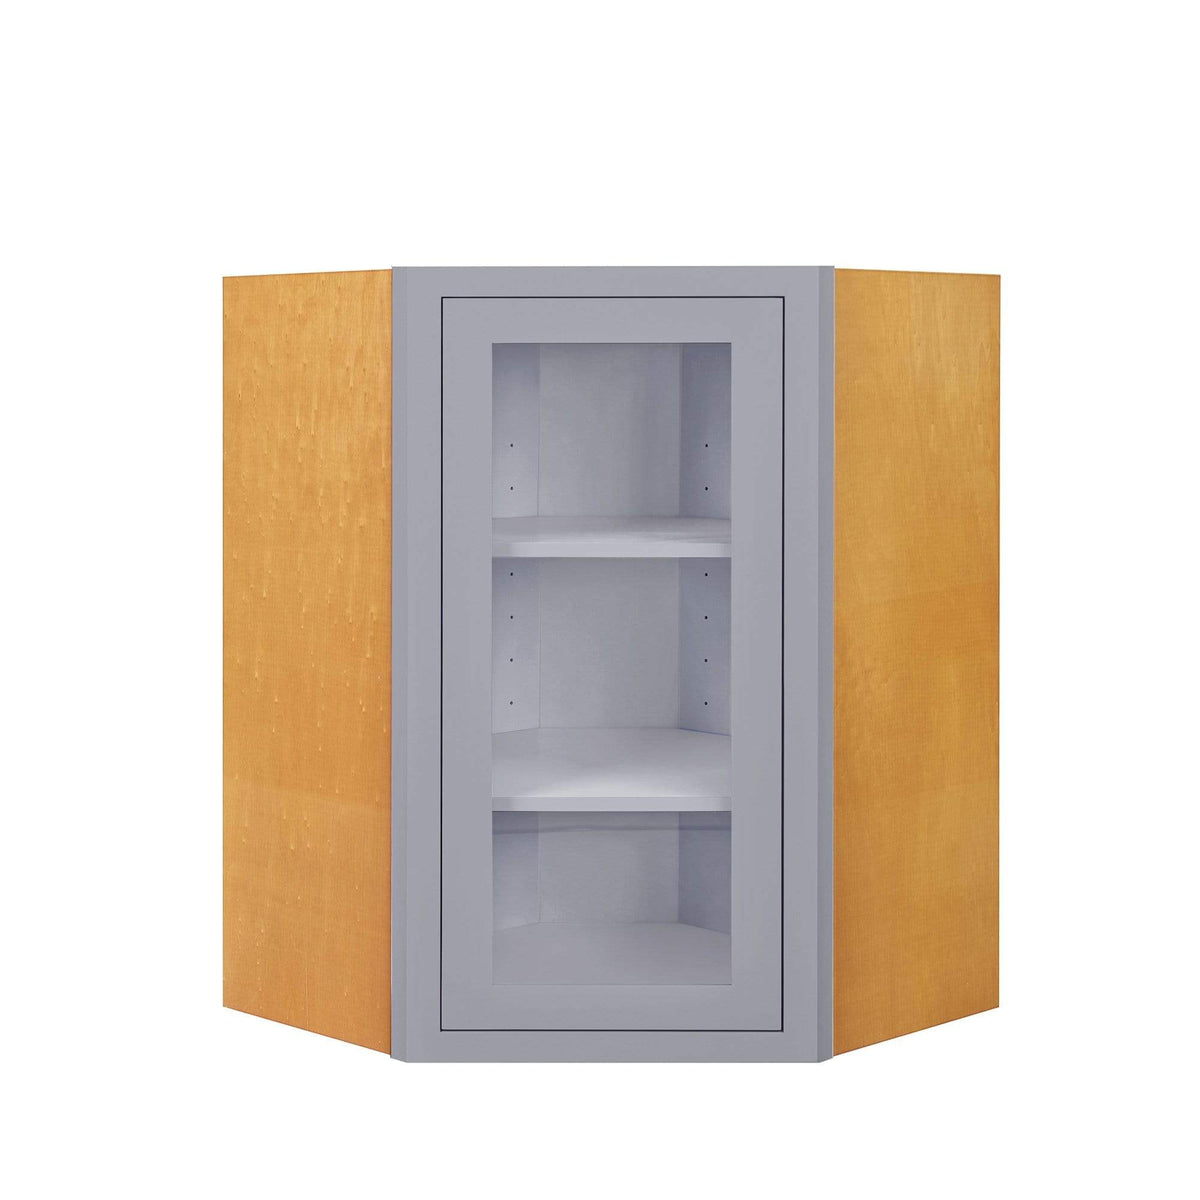 Wall Cabinet Diagonal Corner Light Gray Inset Shaker Wall Cabinet - Single Door Glass 27" Wide x 30" Tall Wide Inset Kitchen Cabinets